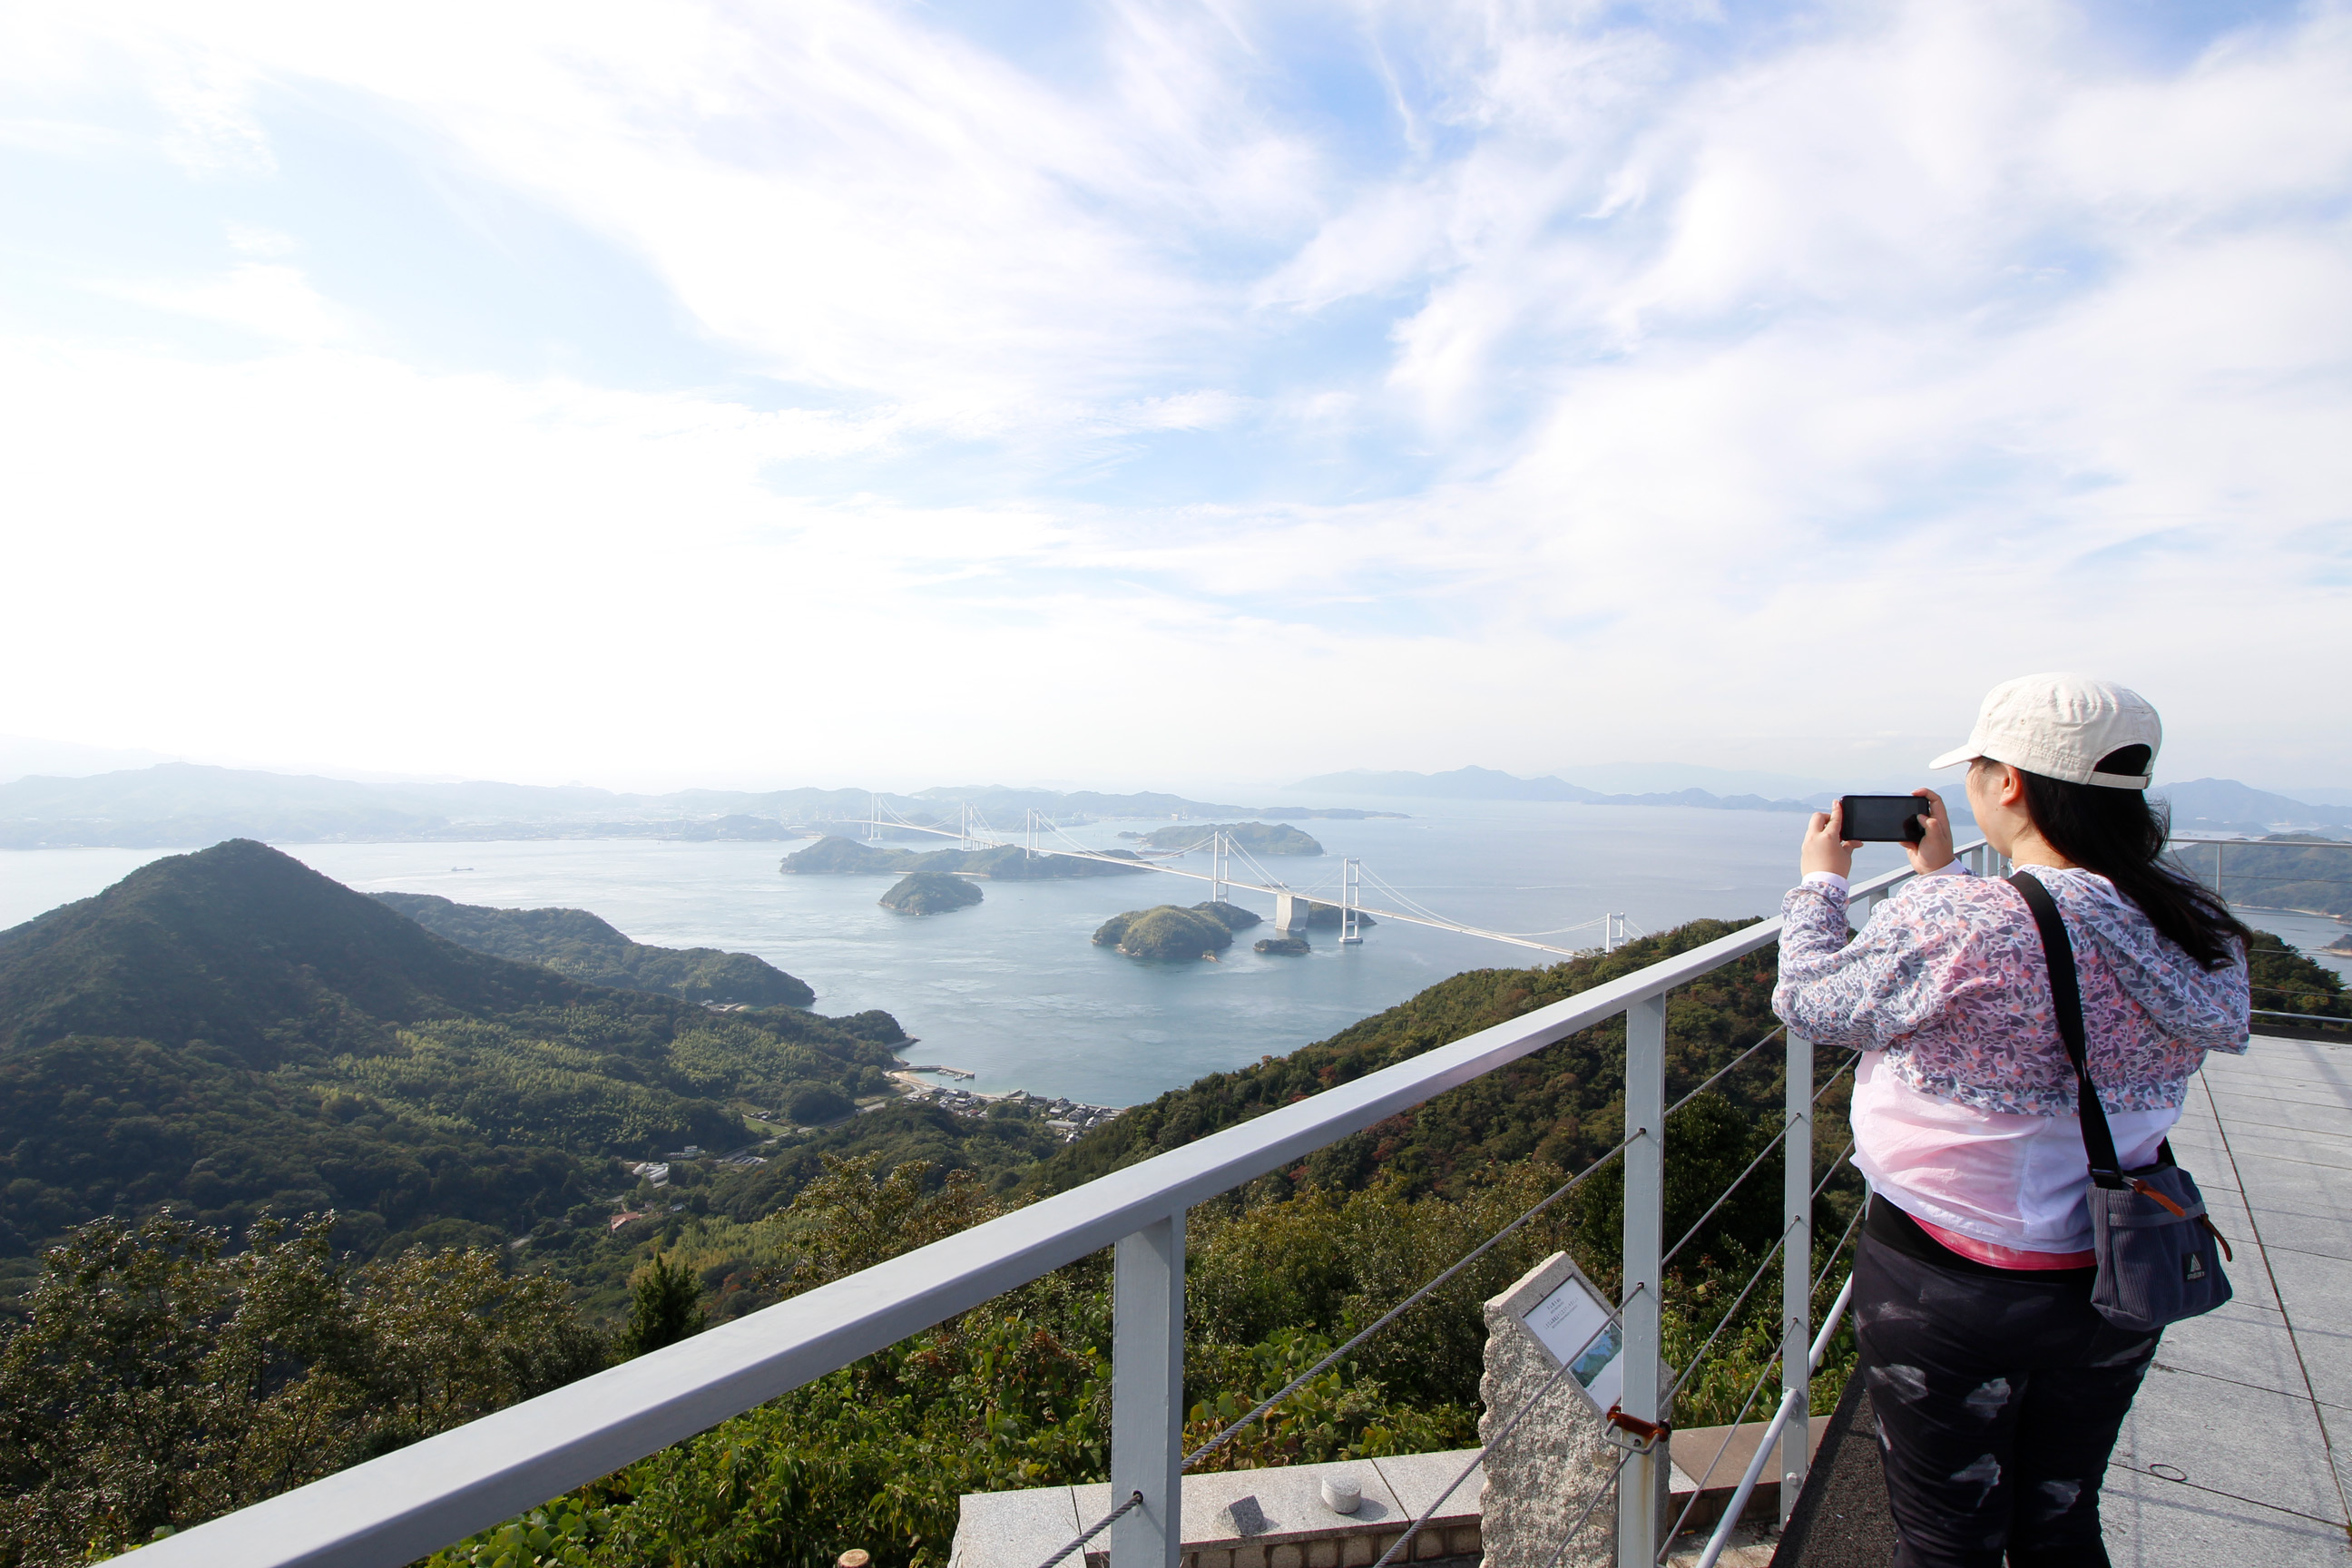 Magnificent viewing spots on islands